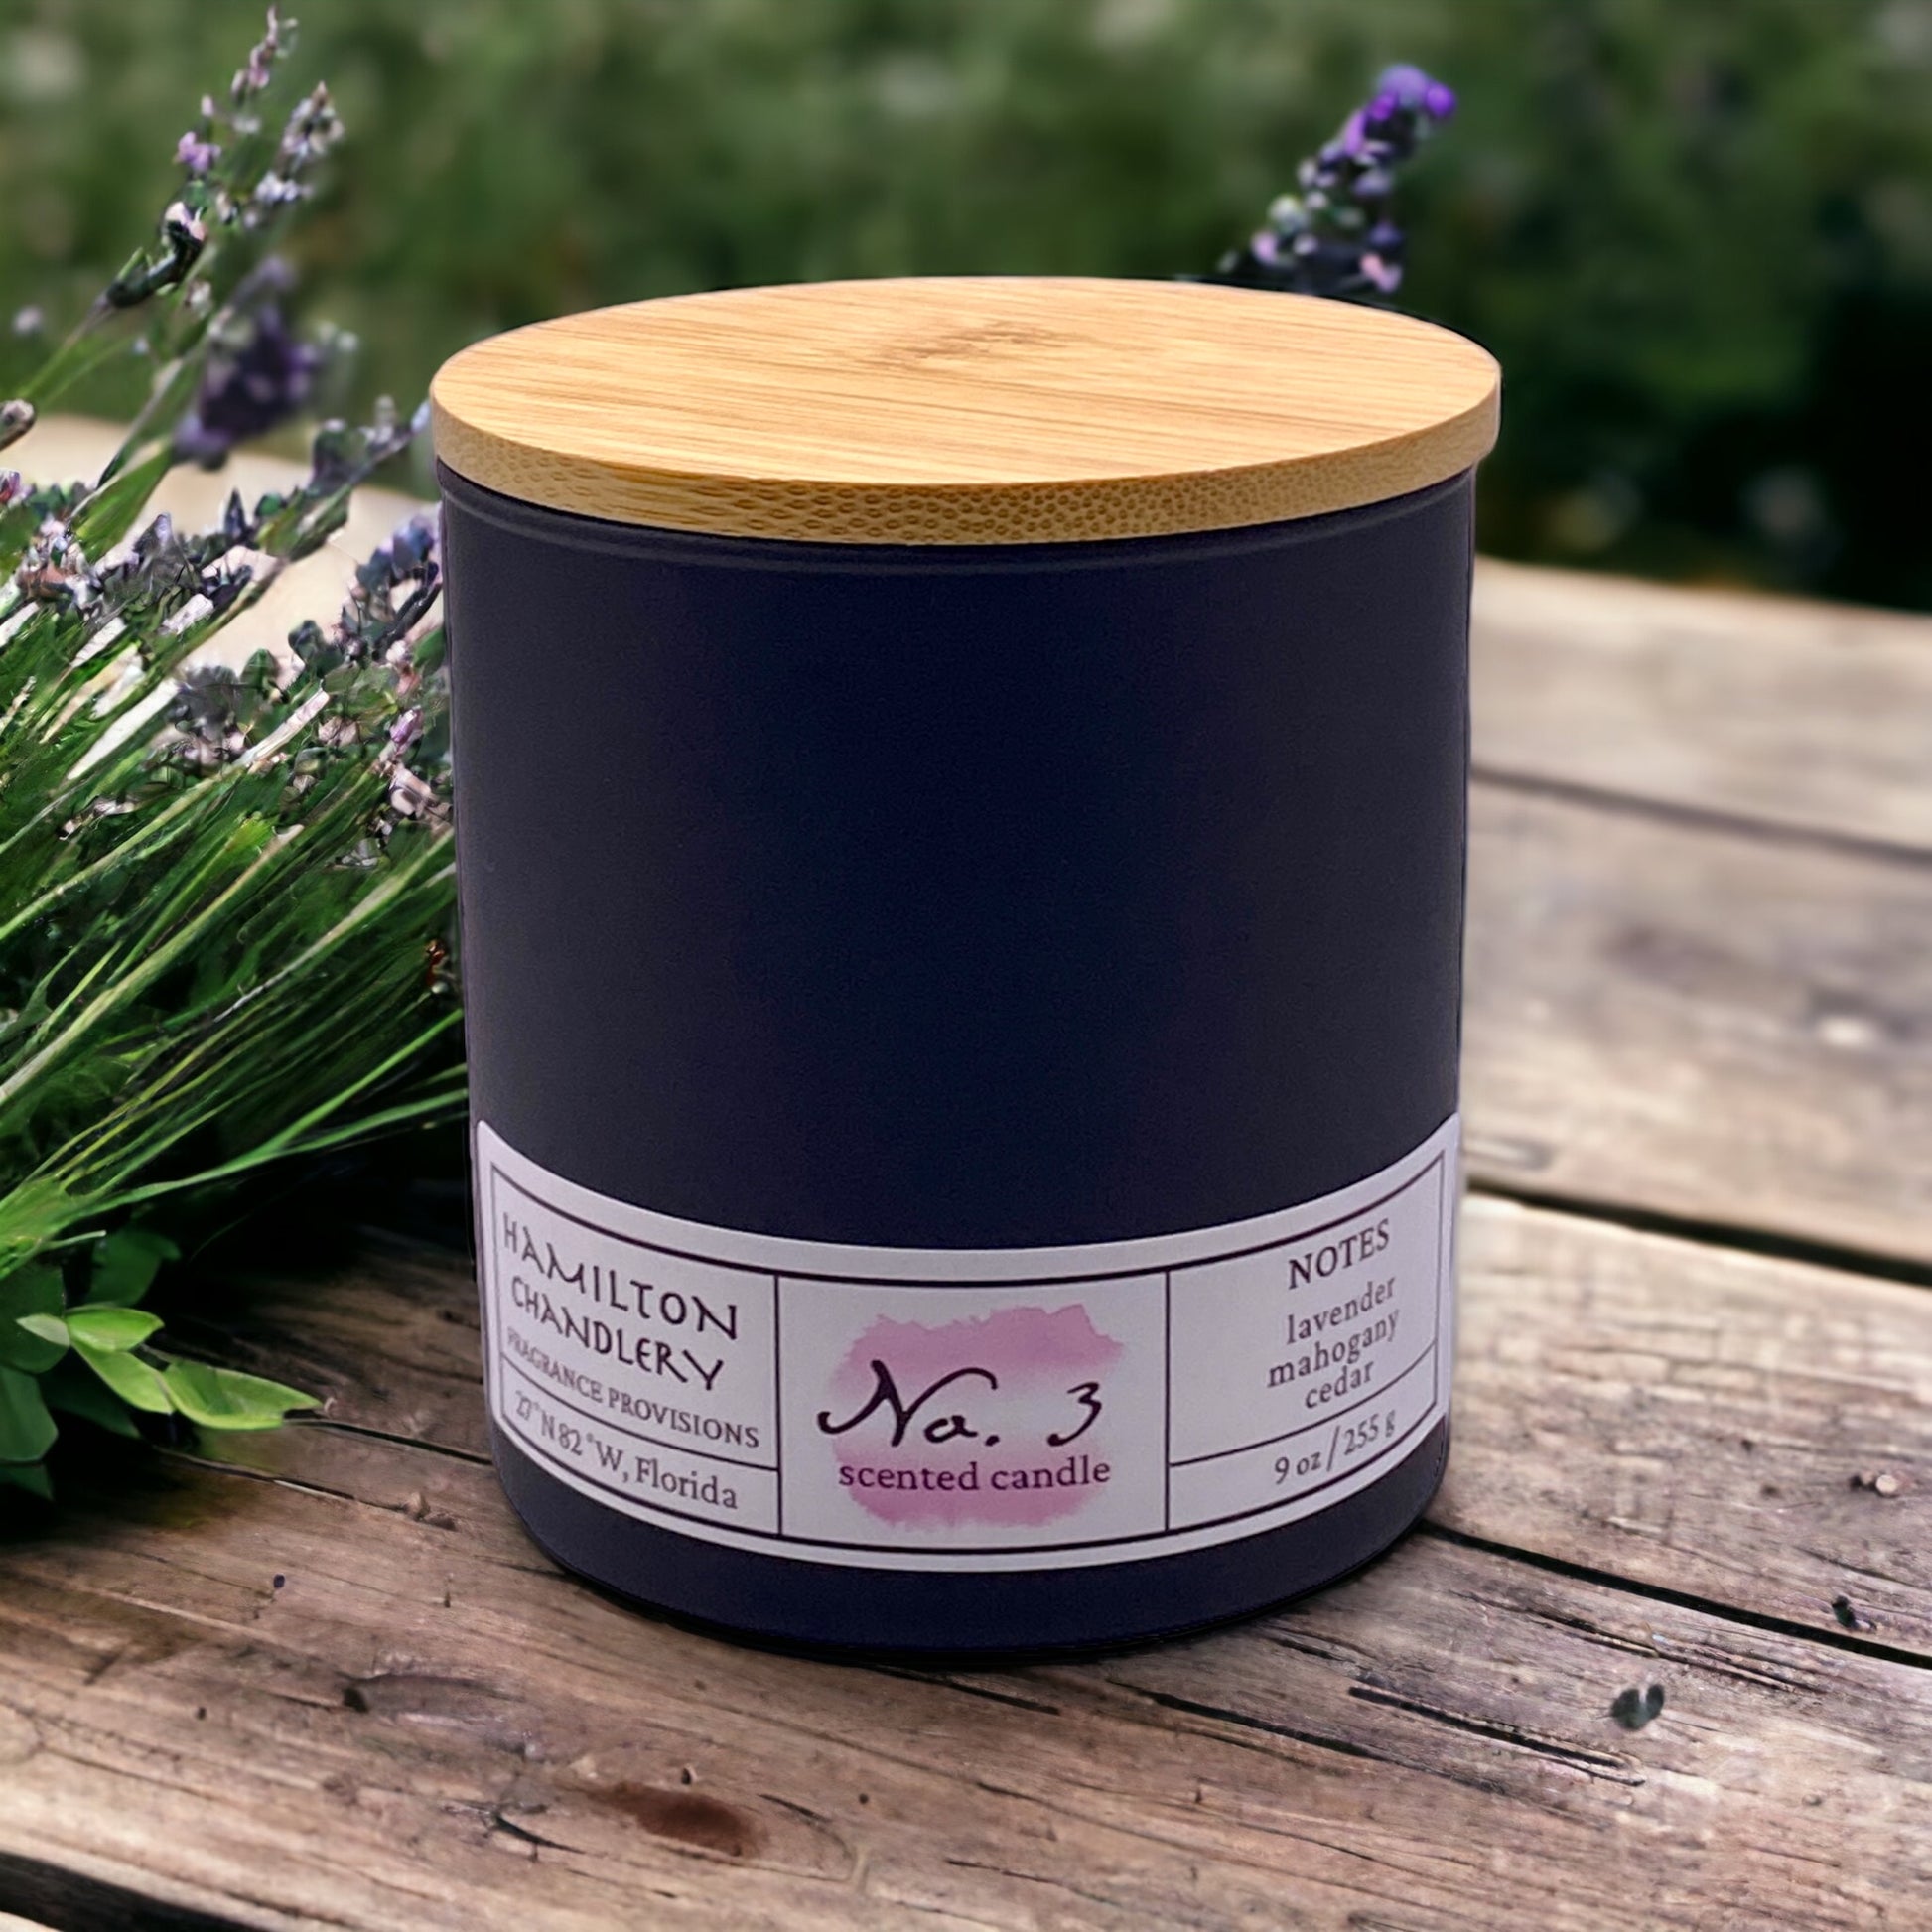 Fragrance No. 3 Blown Glass Candle on Wooden Table with Fresh Cut Lavender | Hamilton Chandlery